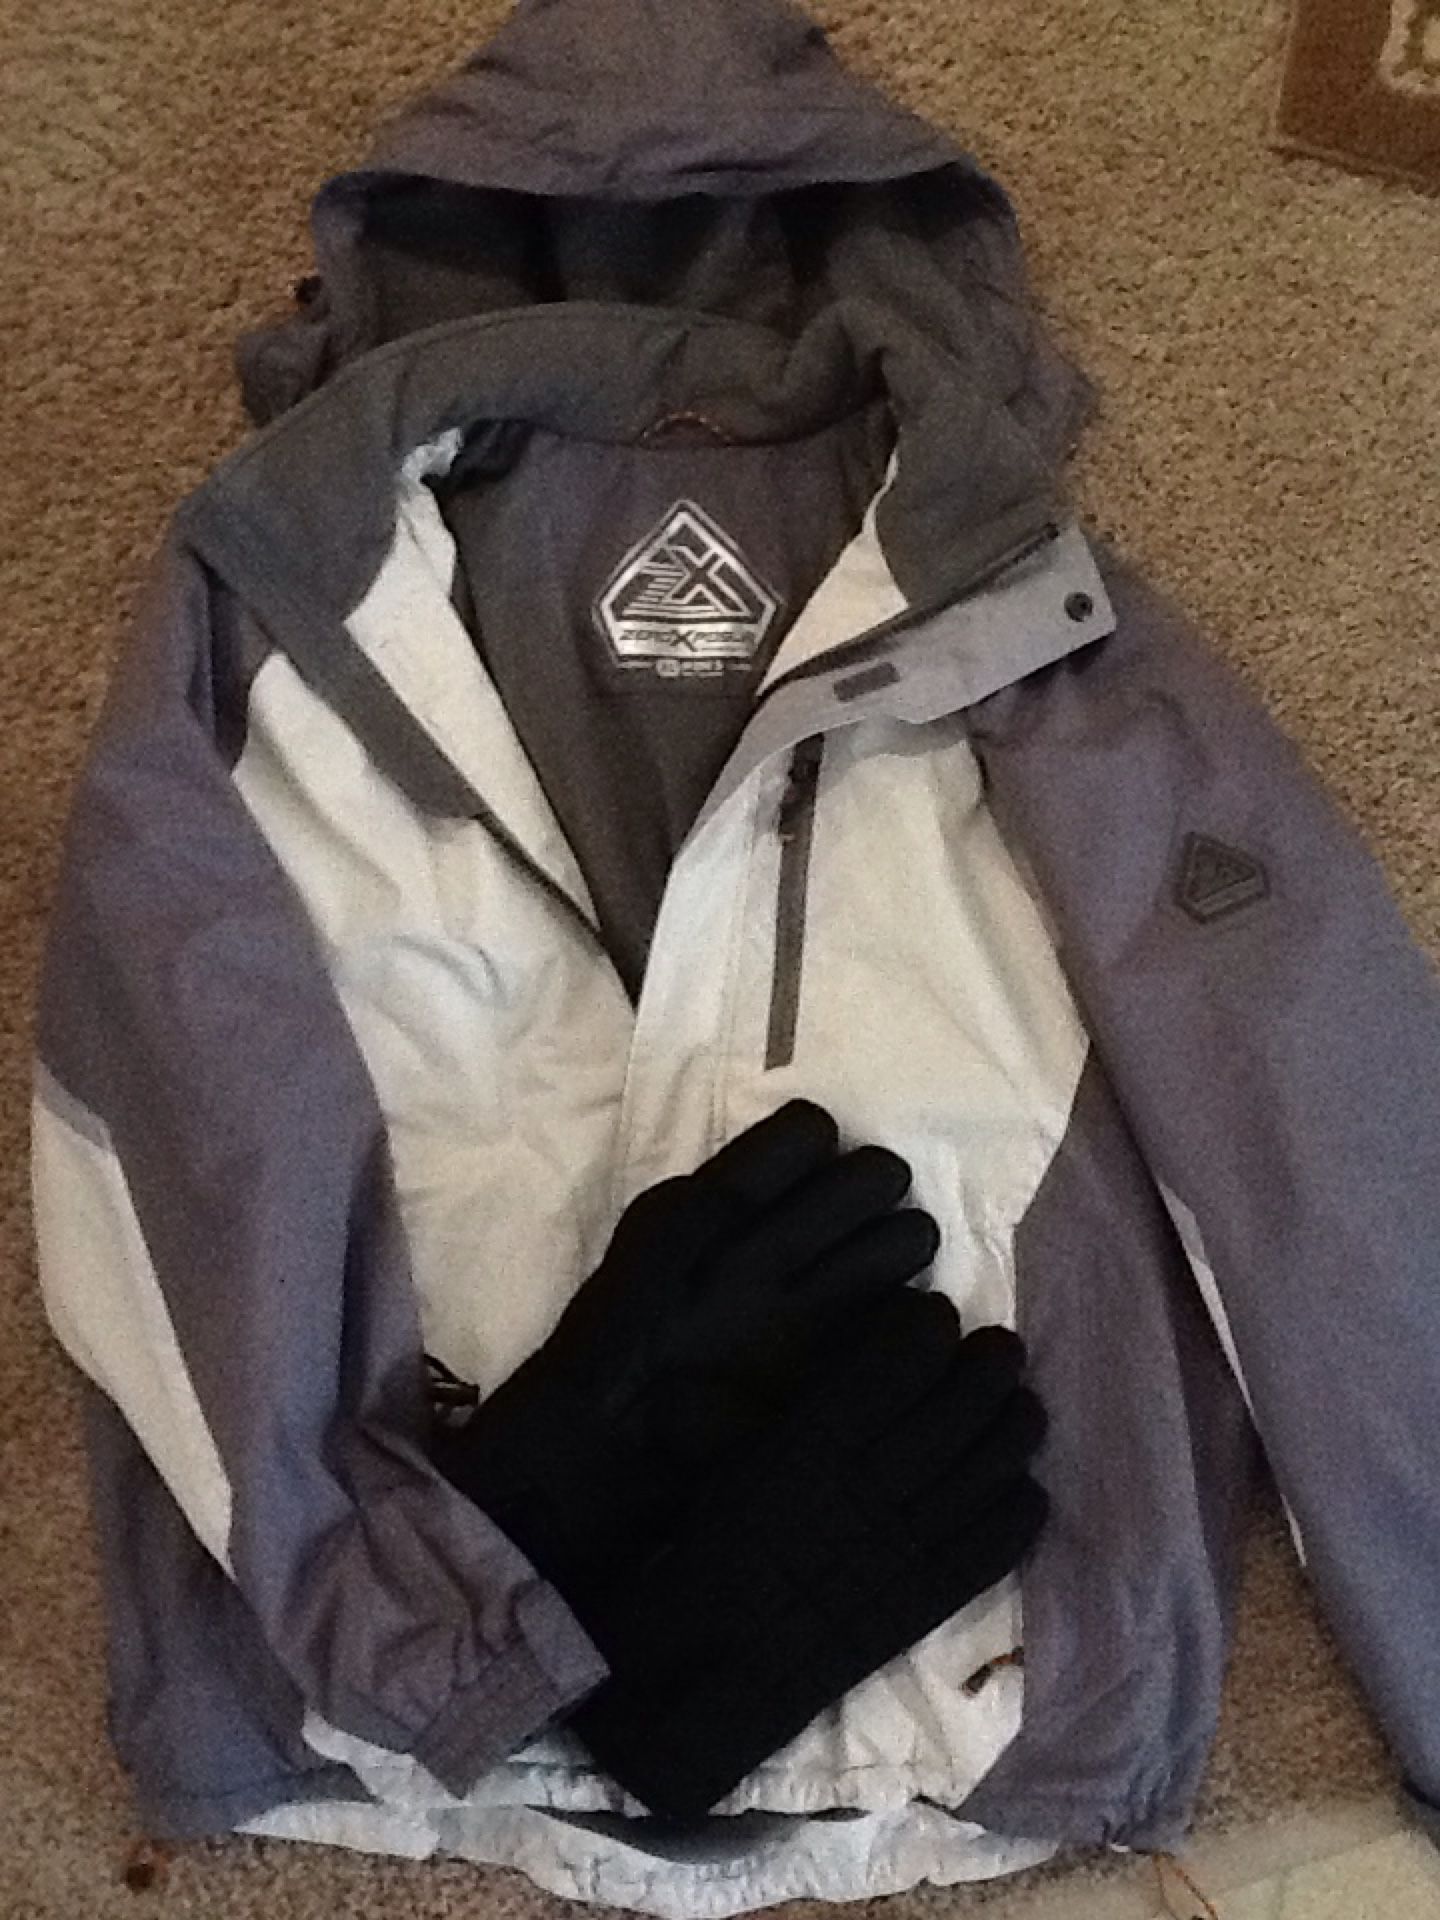 USED Men's ZERO X POSUR Winter Jacket (size XL) and Thinsulate Gloves.